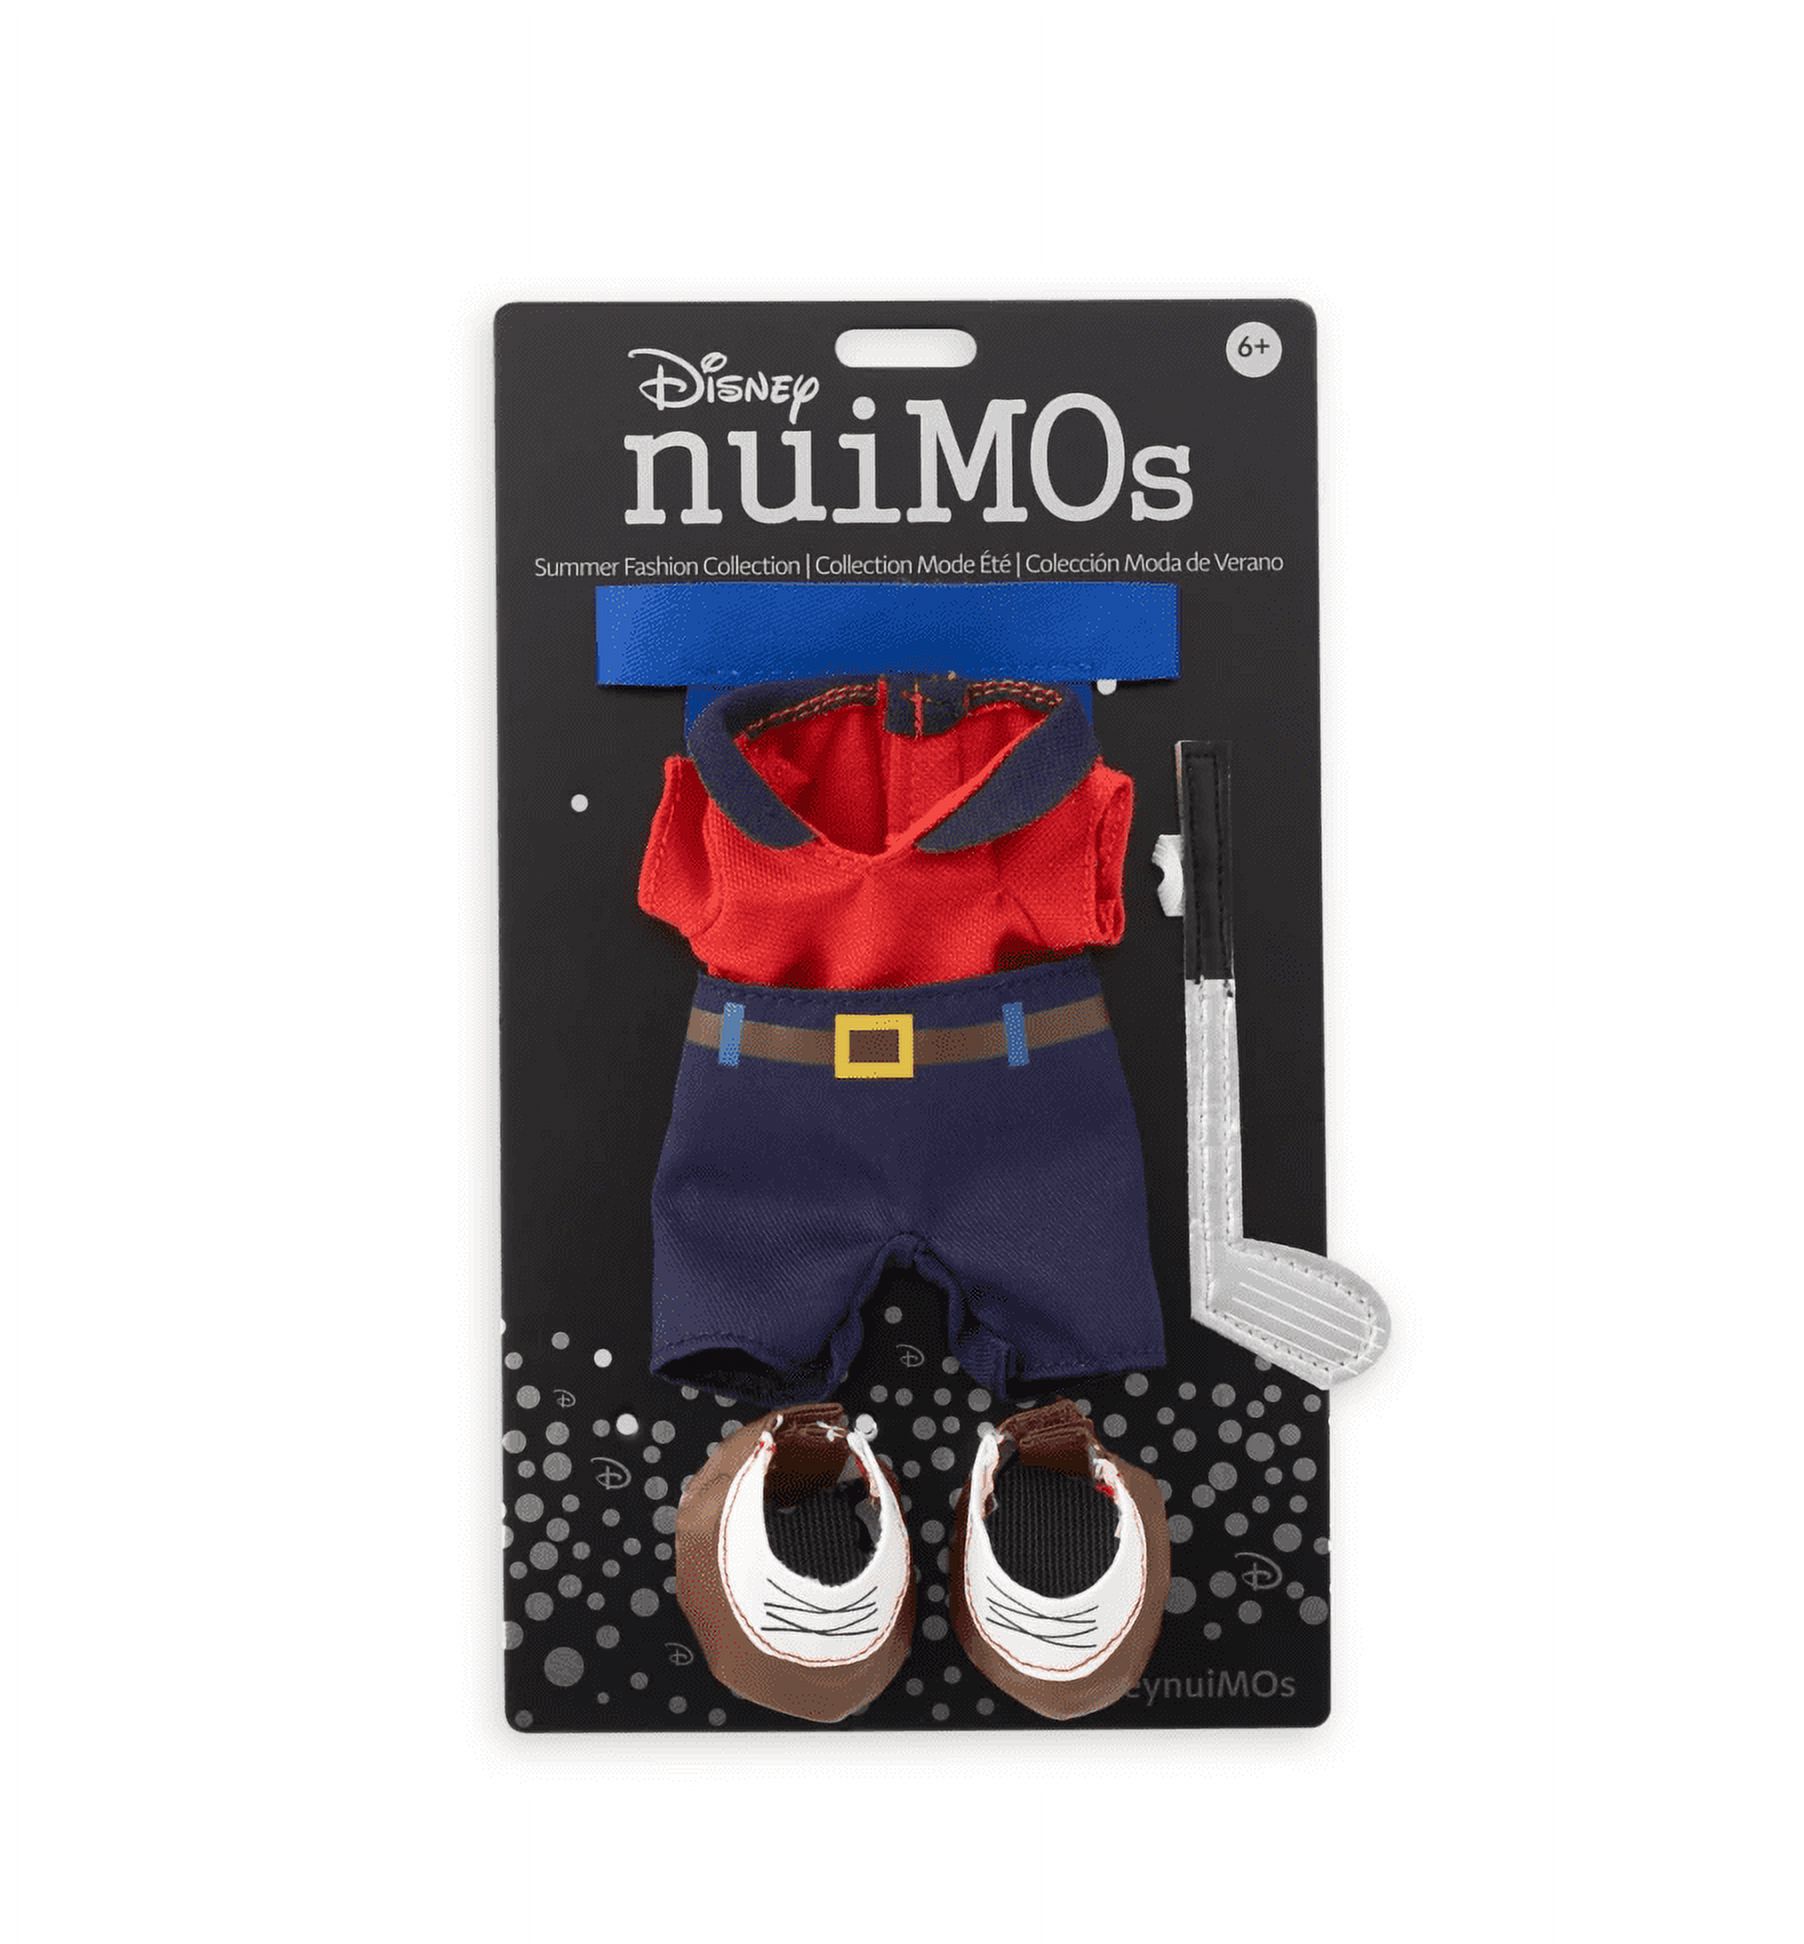 Disney NuiMOs Golf Outfit with Pants New with Card - image 1 of 3